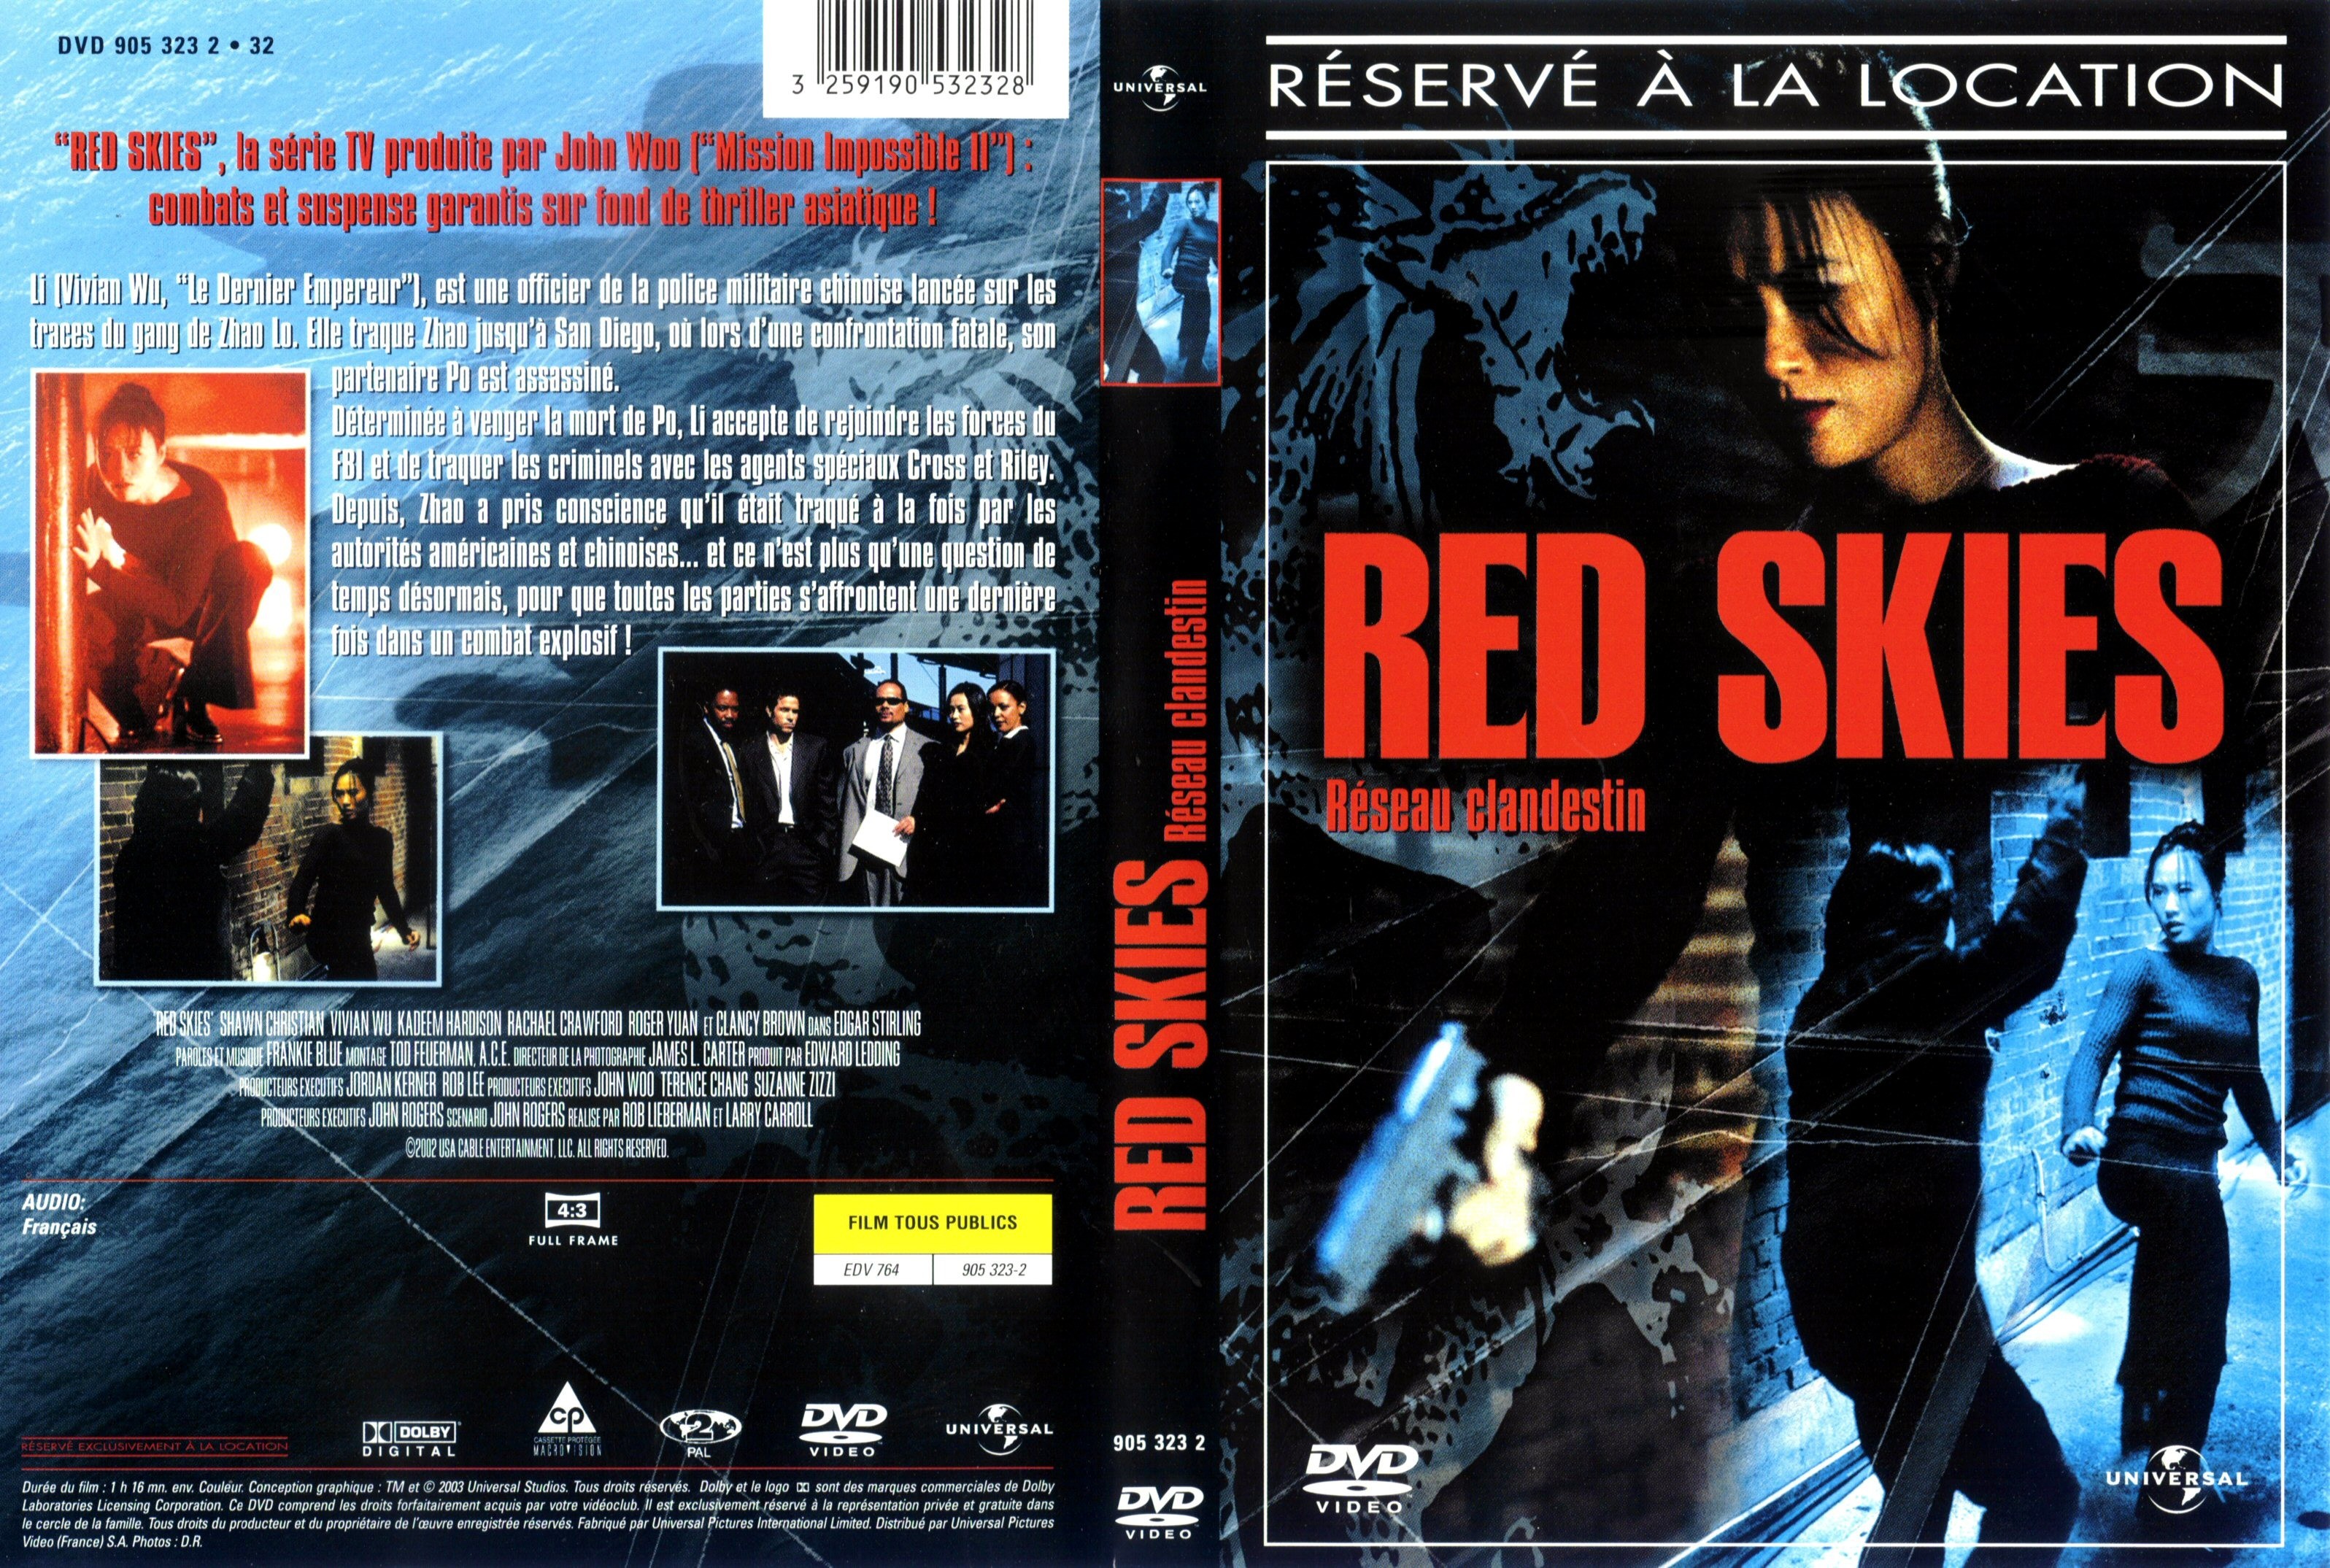 Jaquette DVD Red Skies